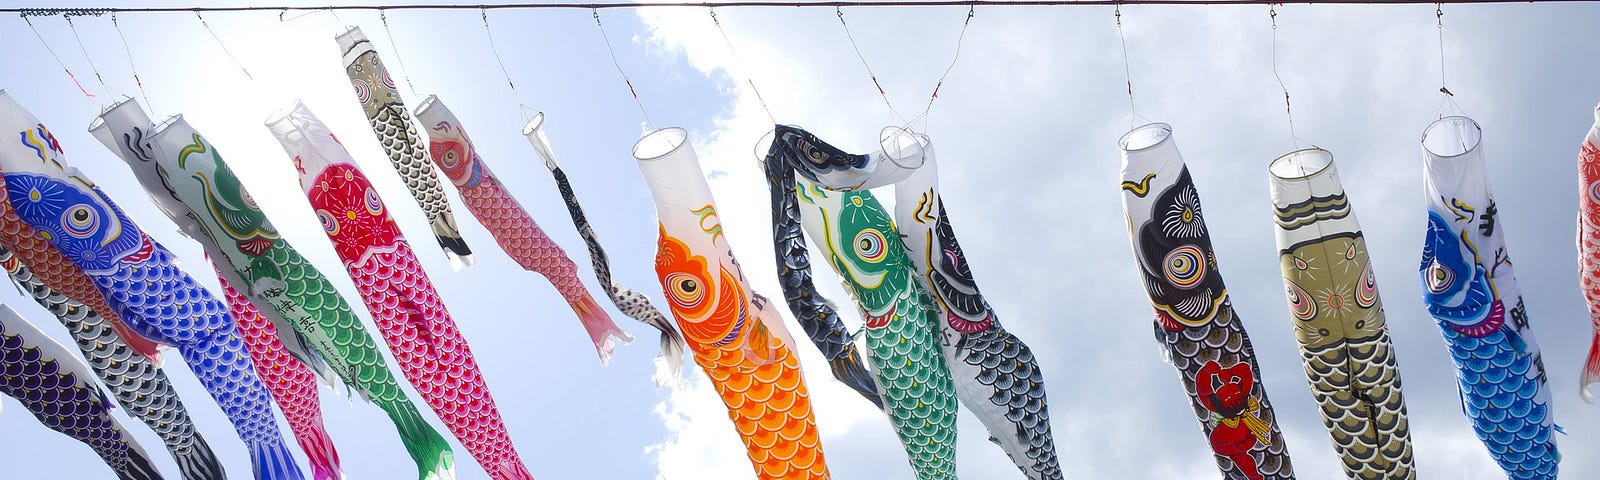 Carp streamers against a blue sky are decorations for Children's Day in Japan.